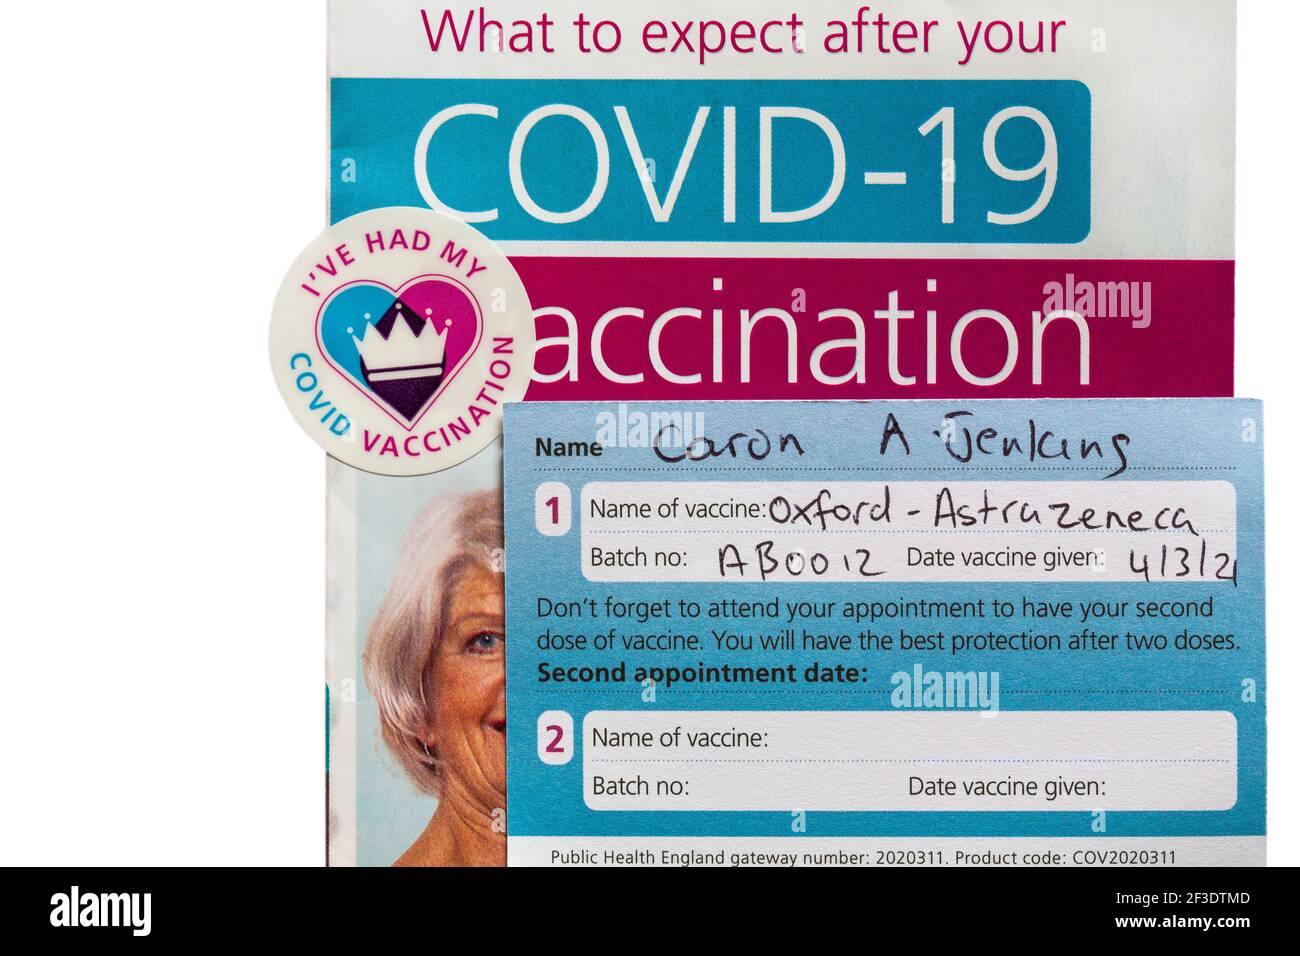 Covid-19 Vaccination leaflet with I've had my Covid vaccination sticker & vaccination record card issued by NHS for Oxford AstraZeneca vaccine Stock Photo